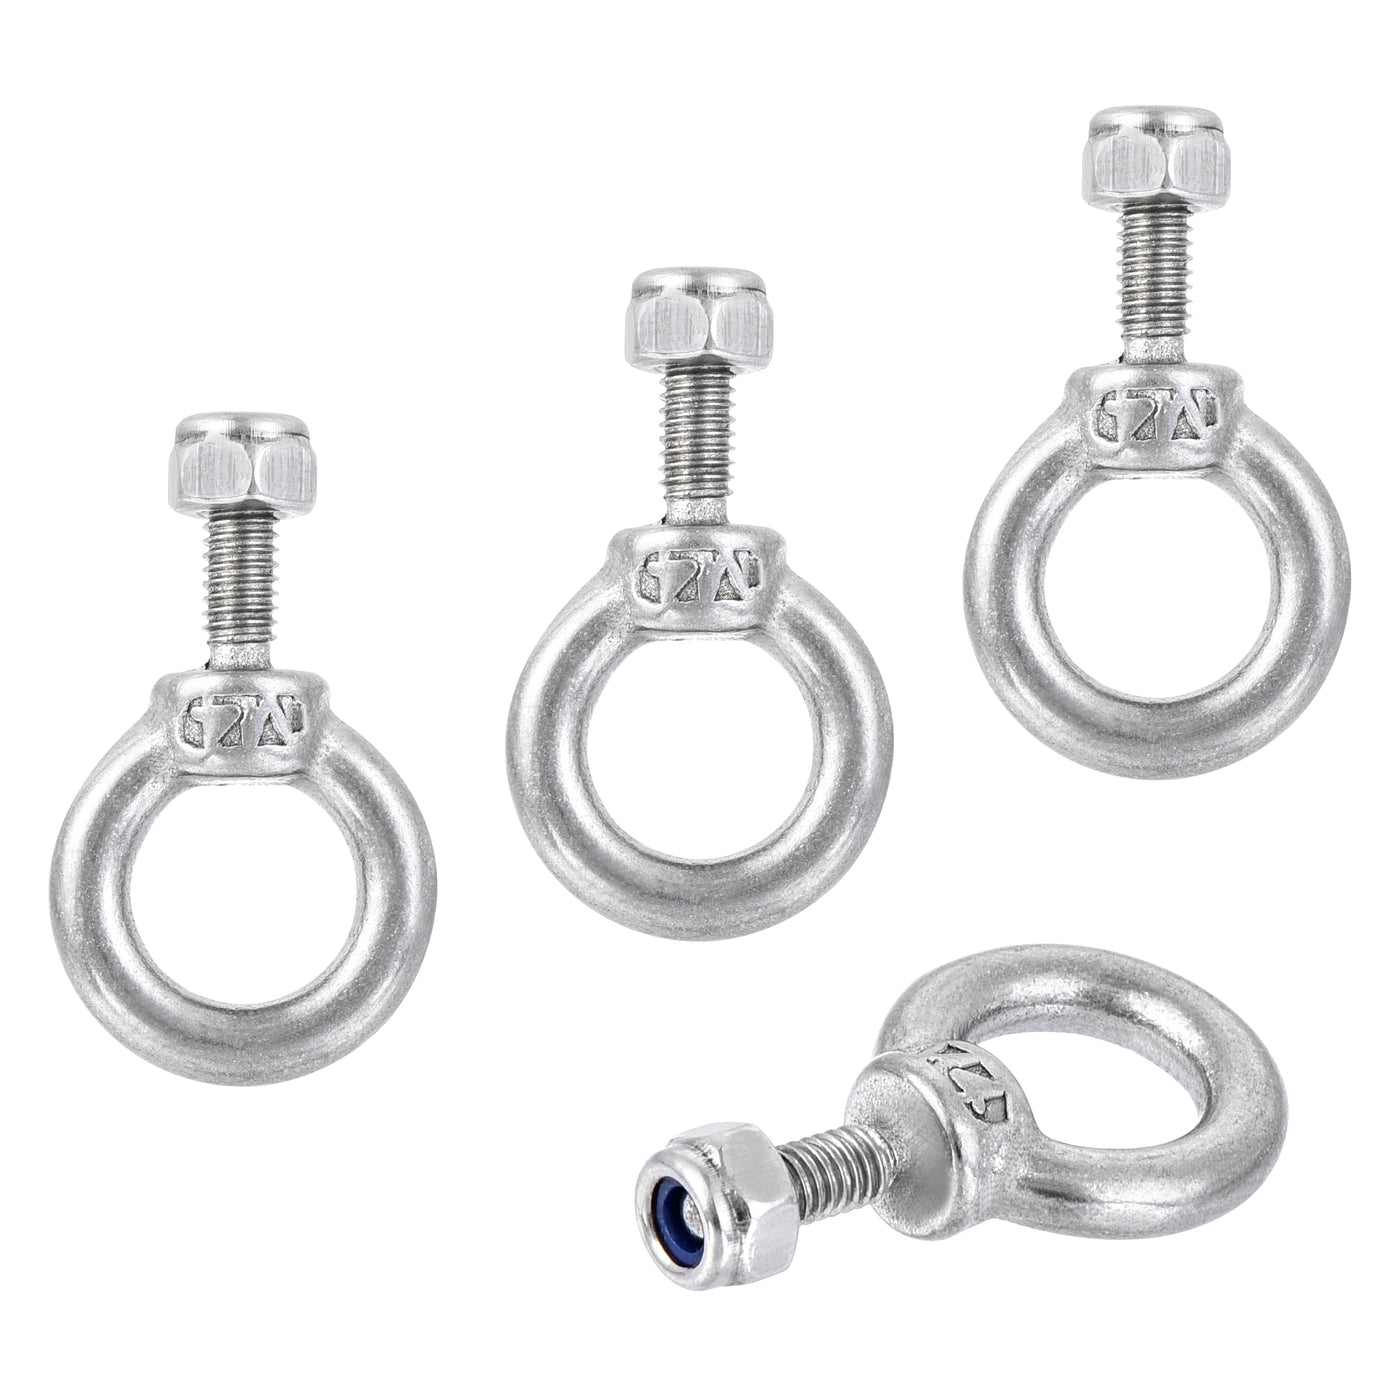 uxcell Uxcell Lifting Eye Bolt M4 x 11mm Male Thread with Hex Screw Nut for Hanging, 304 Stainless Steel, 4 Sets